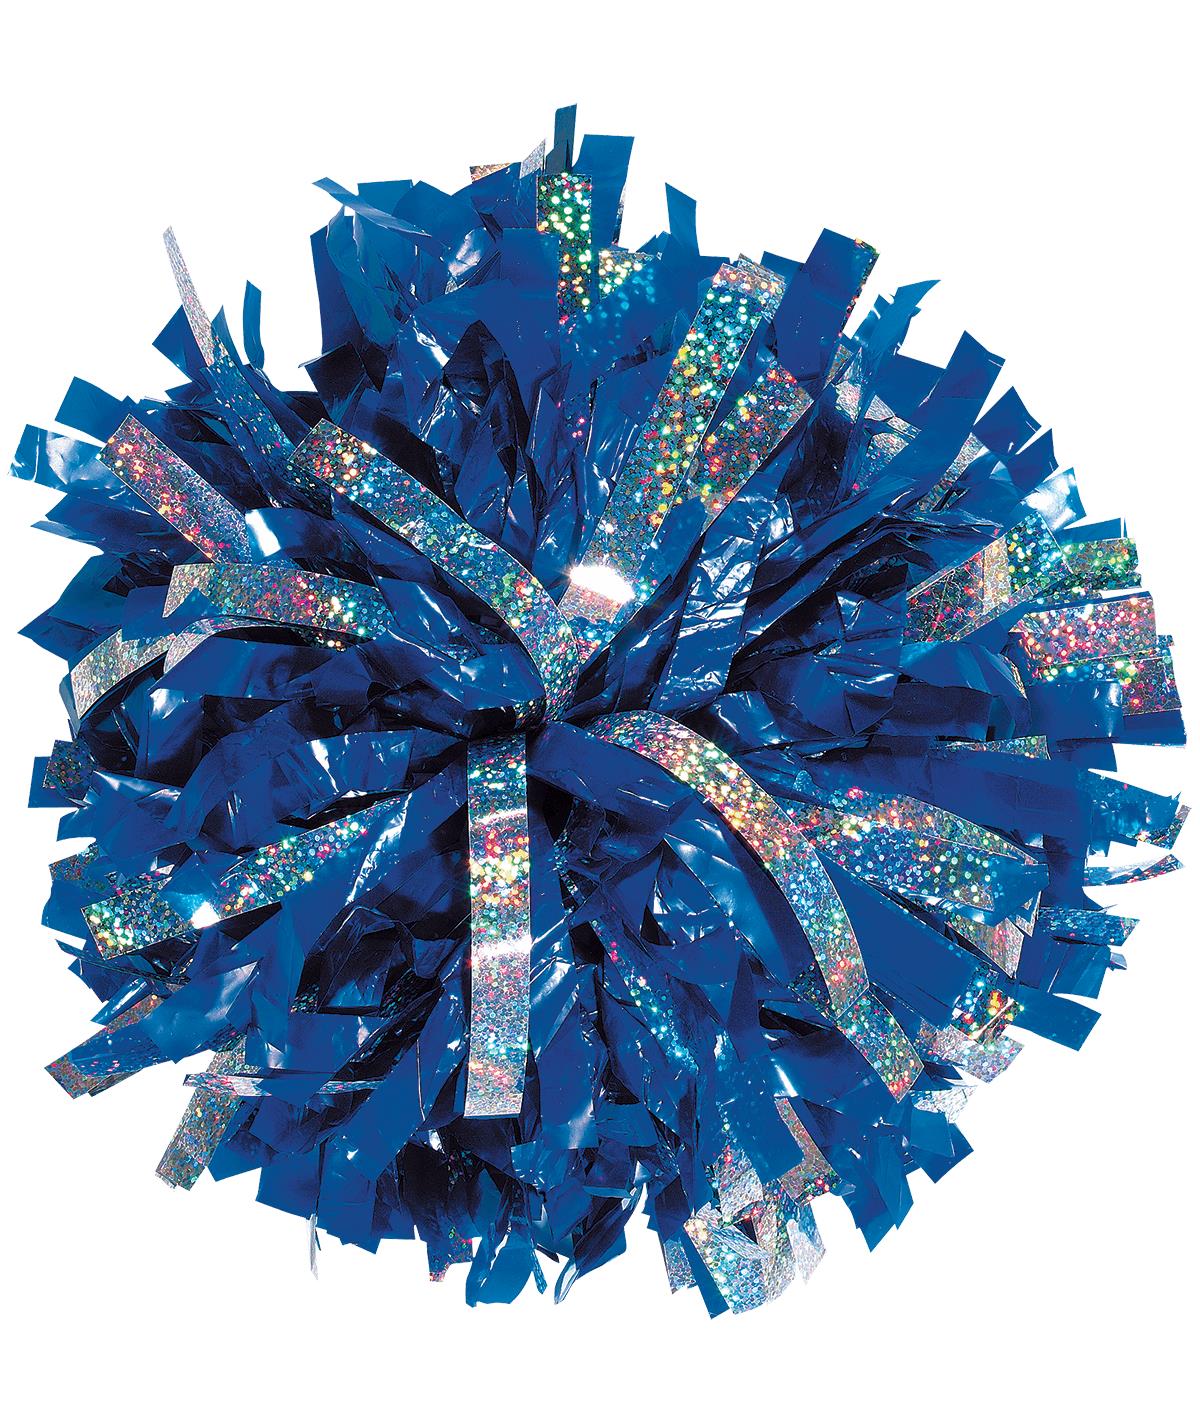 2 Pack 12 Inch Cheerleading Poms Cheering Squad Pompoms for Kids Adults HPWFHPLF Cheerleader Pom Poms